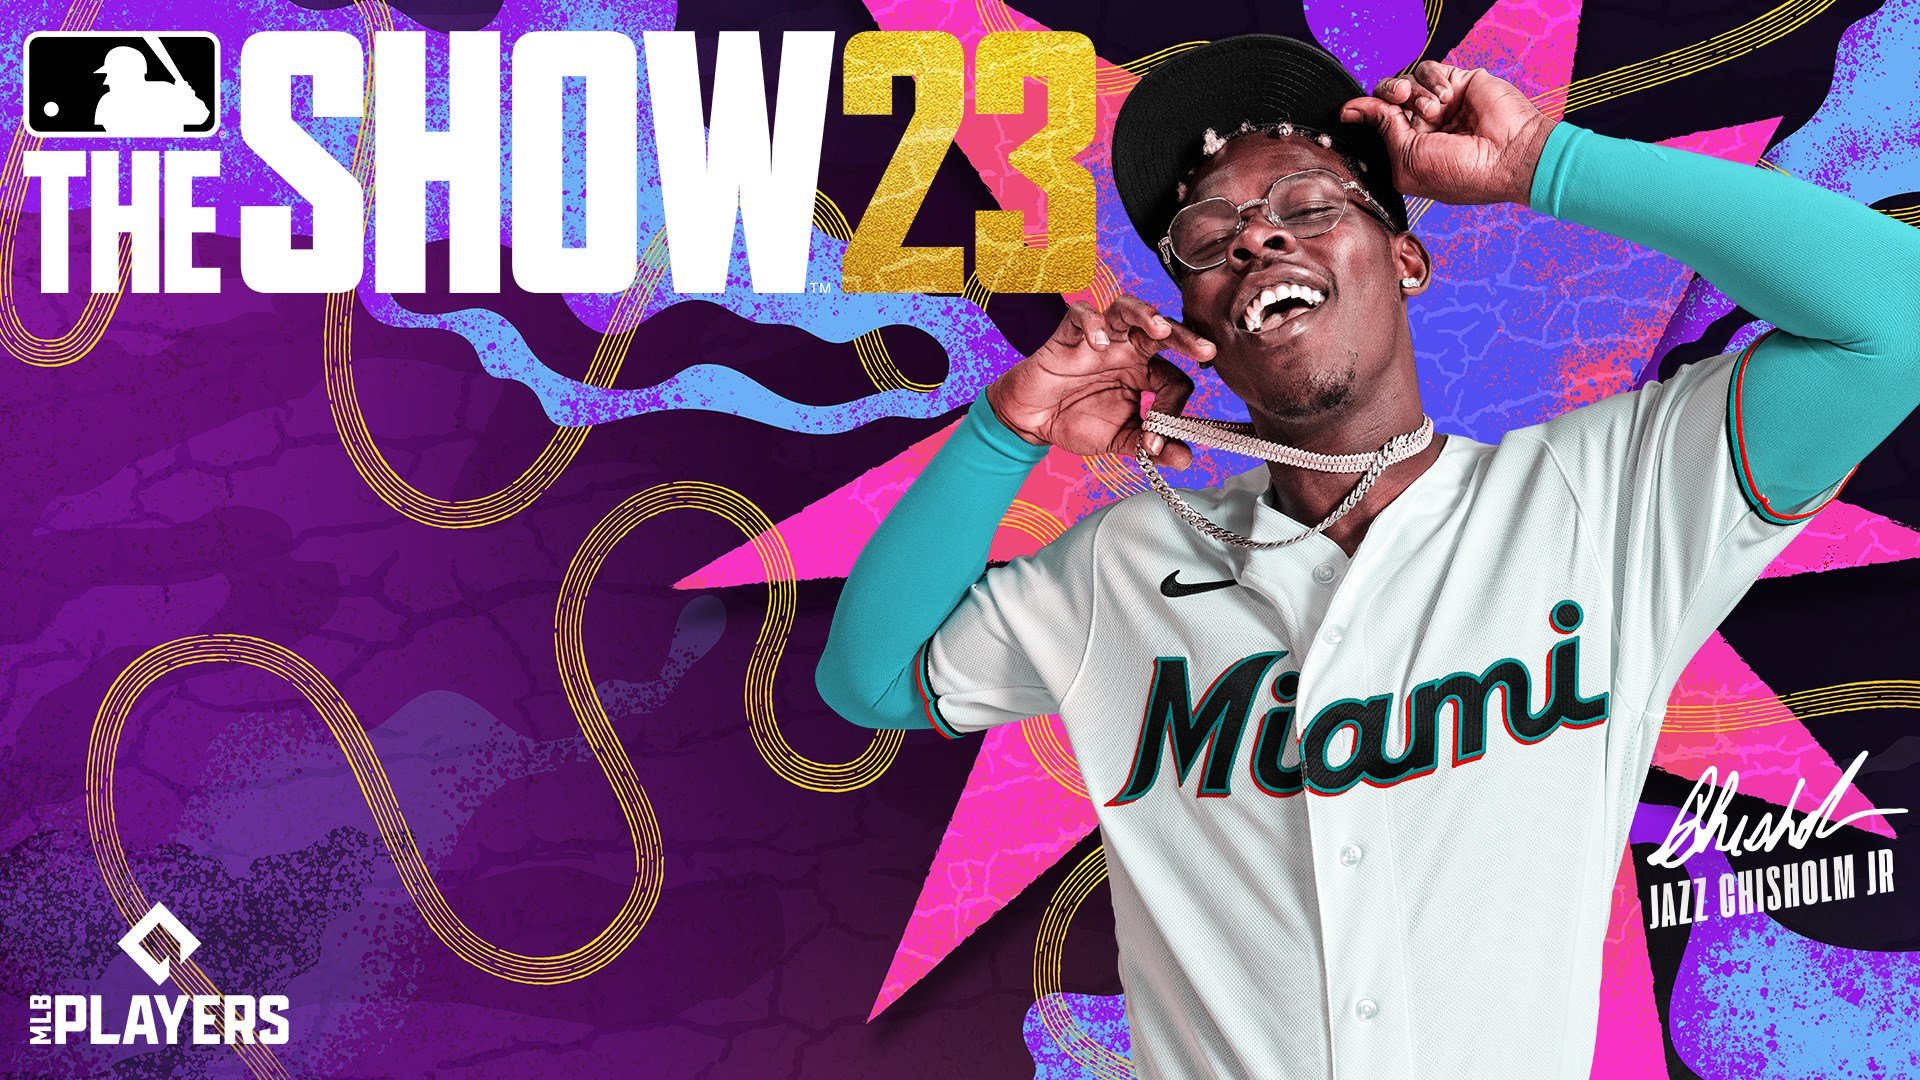 Pre Orders For MLB The Show 23 Are Now Open